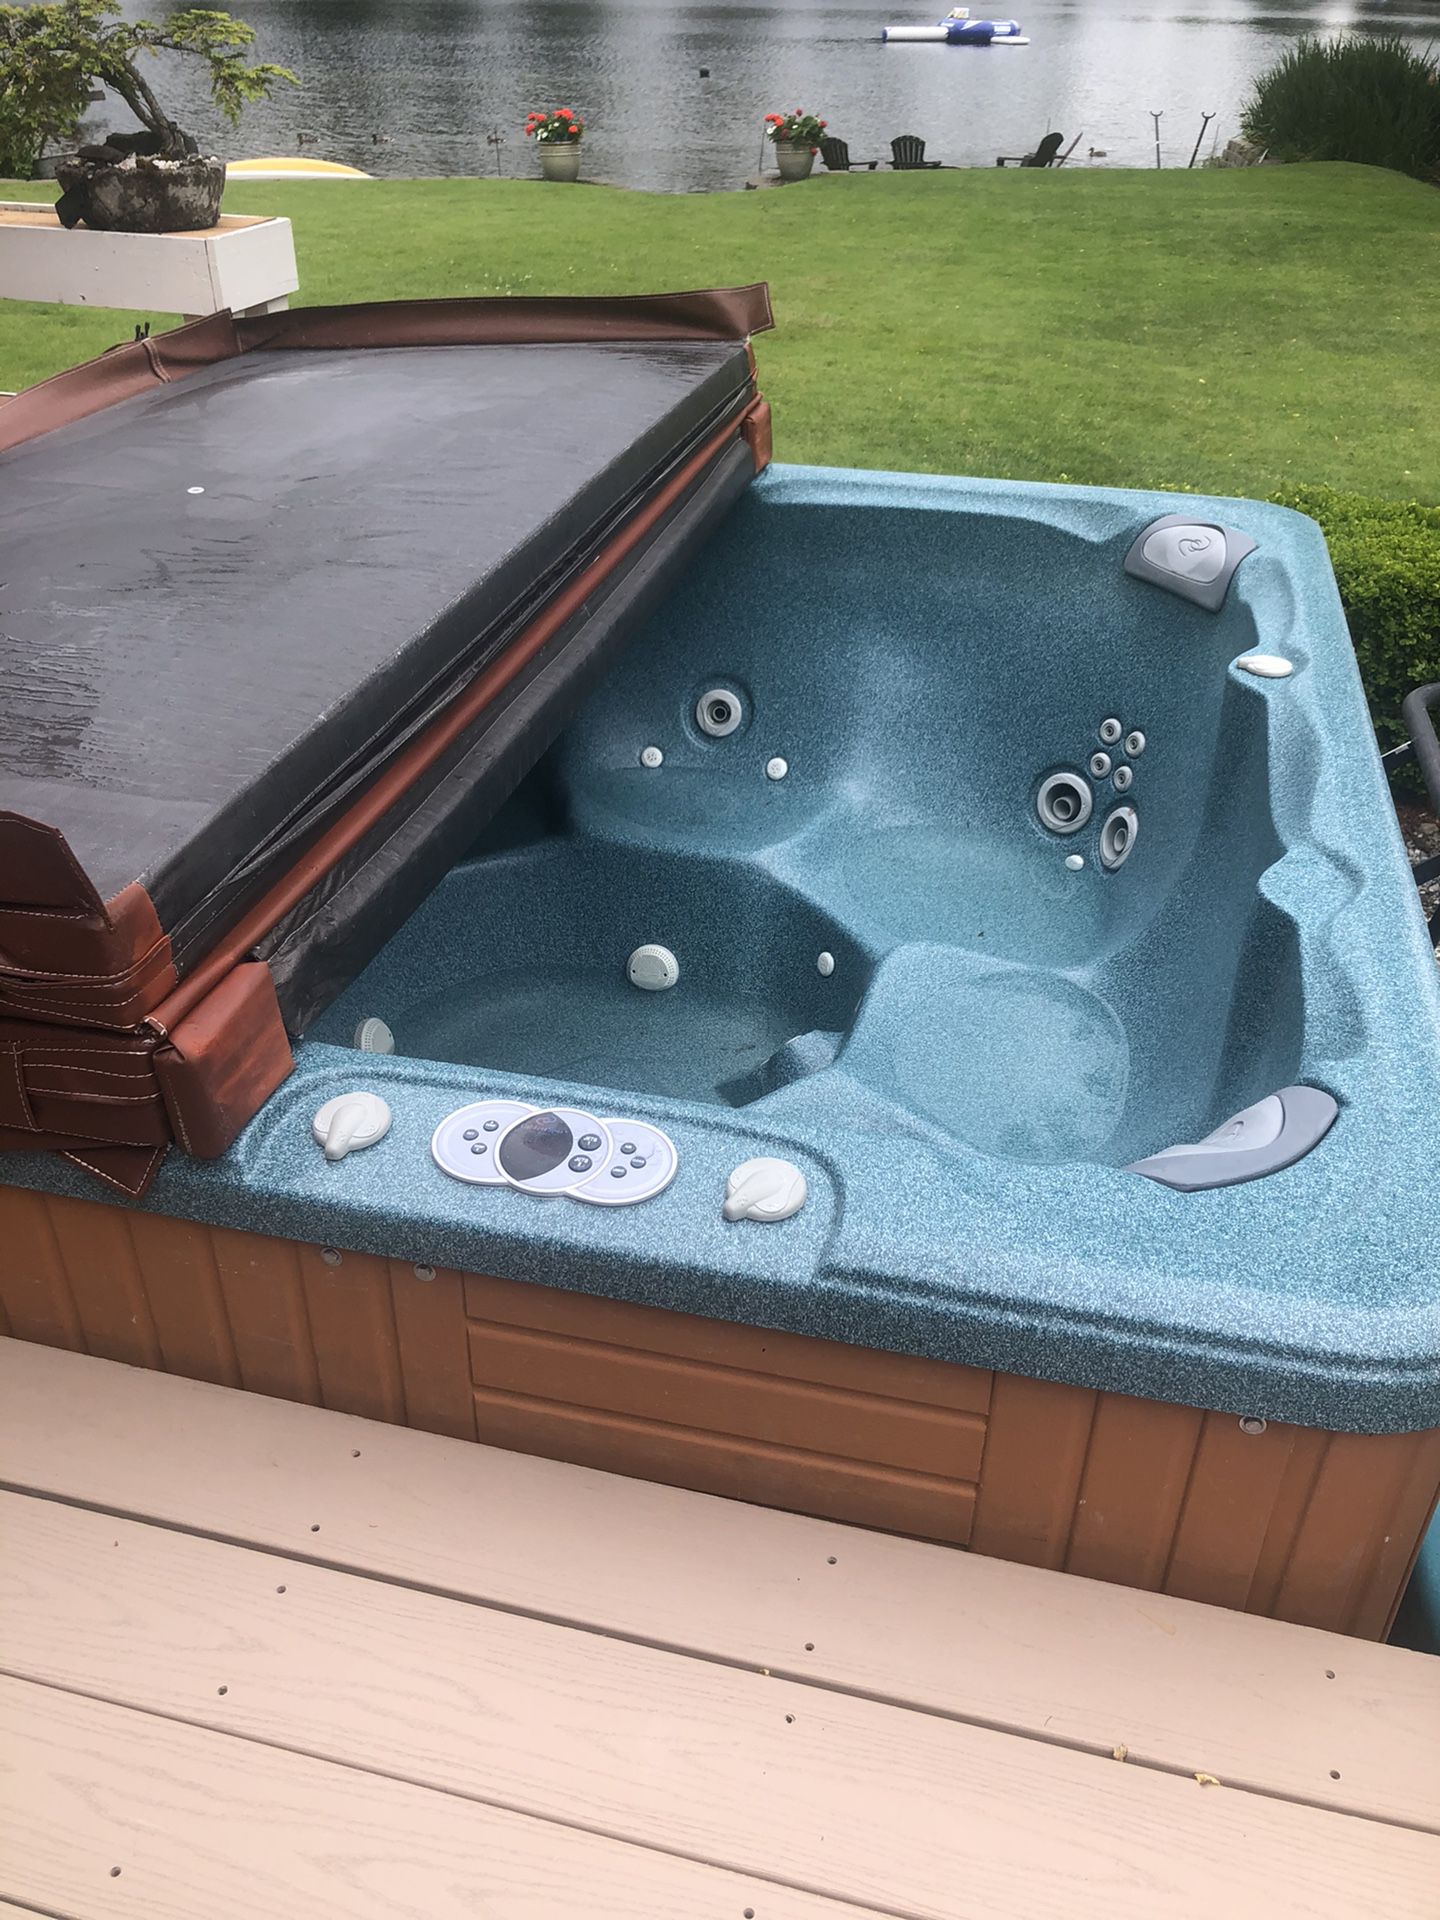 Caldera Hot tub, Hawaiian model, 7’by7’by3’ & 6 person and 2 year old cover comes with.